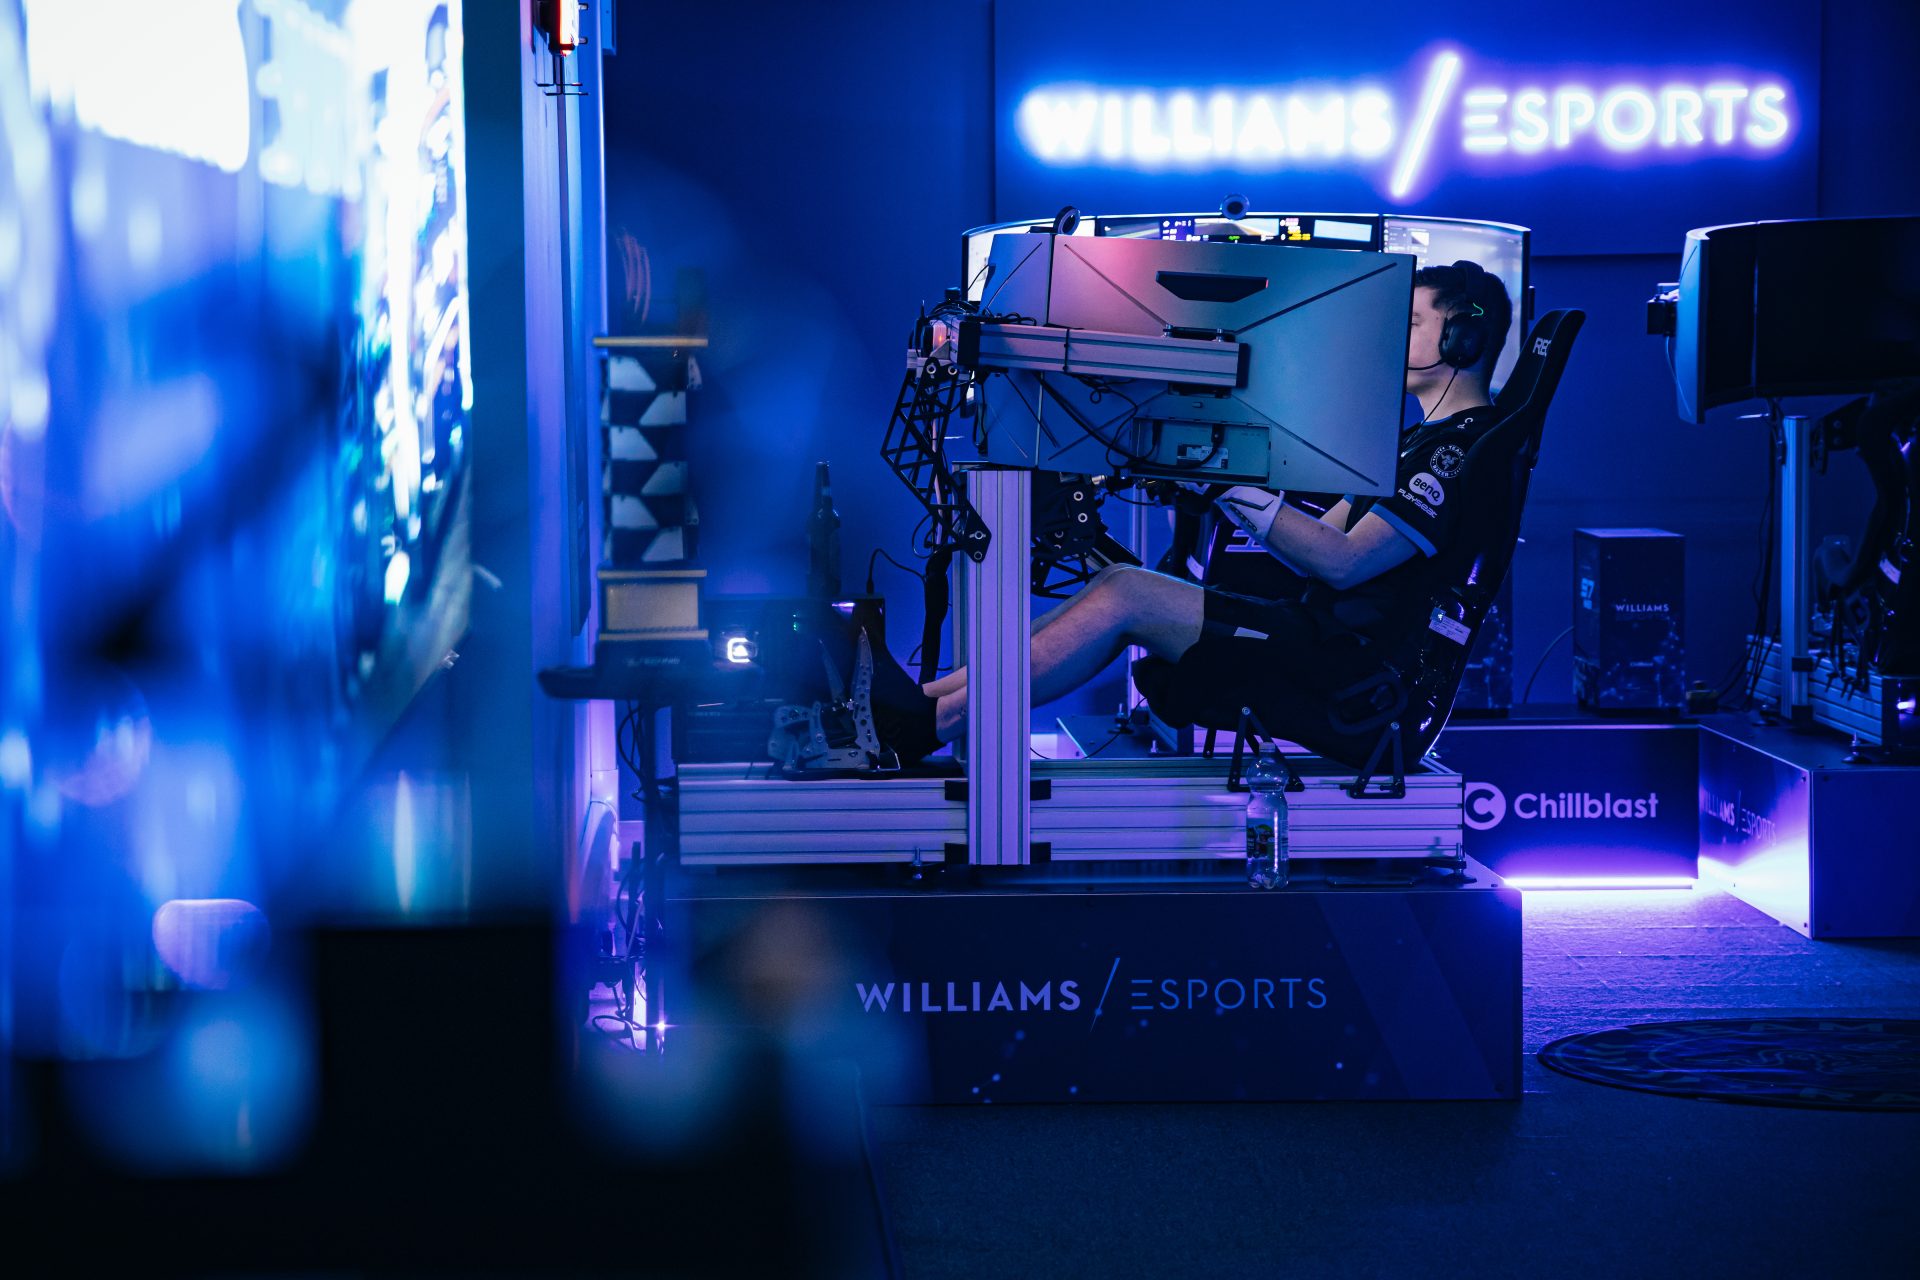 Will Tregurtha - Heusinkveld official supplier of Williams Esports